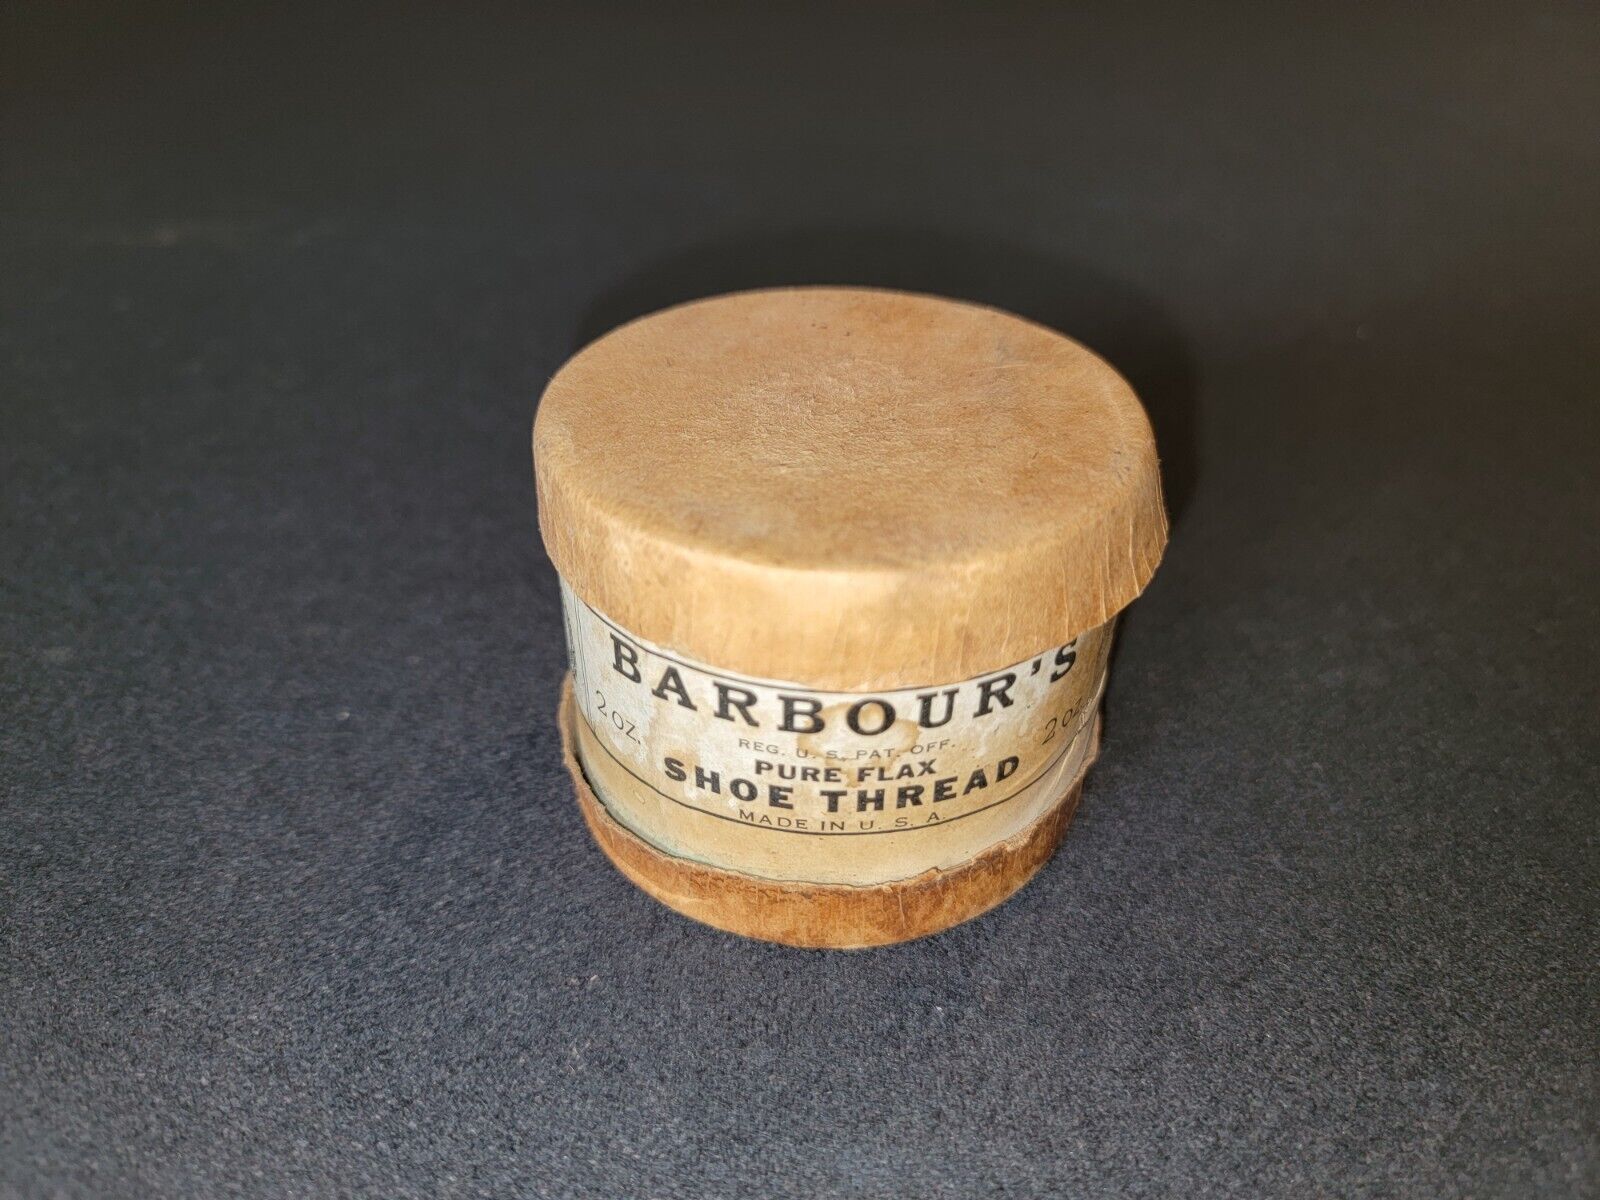 **RARE**Barbour\'s Pure Flax Shoe Thread 2oz. #10 Made in USA